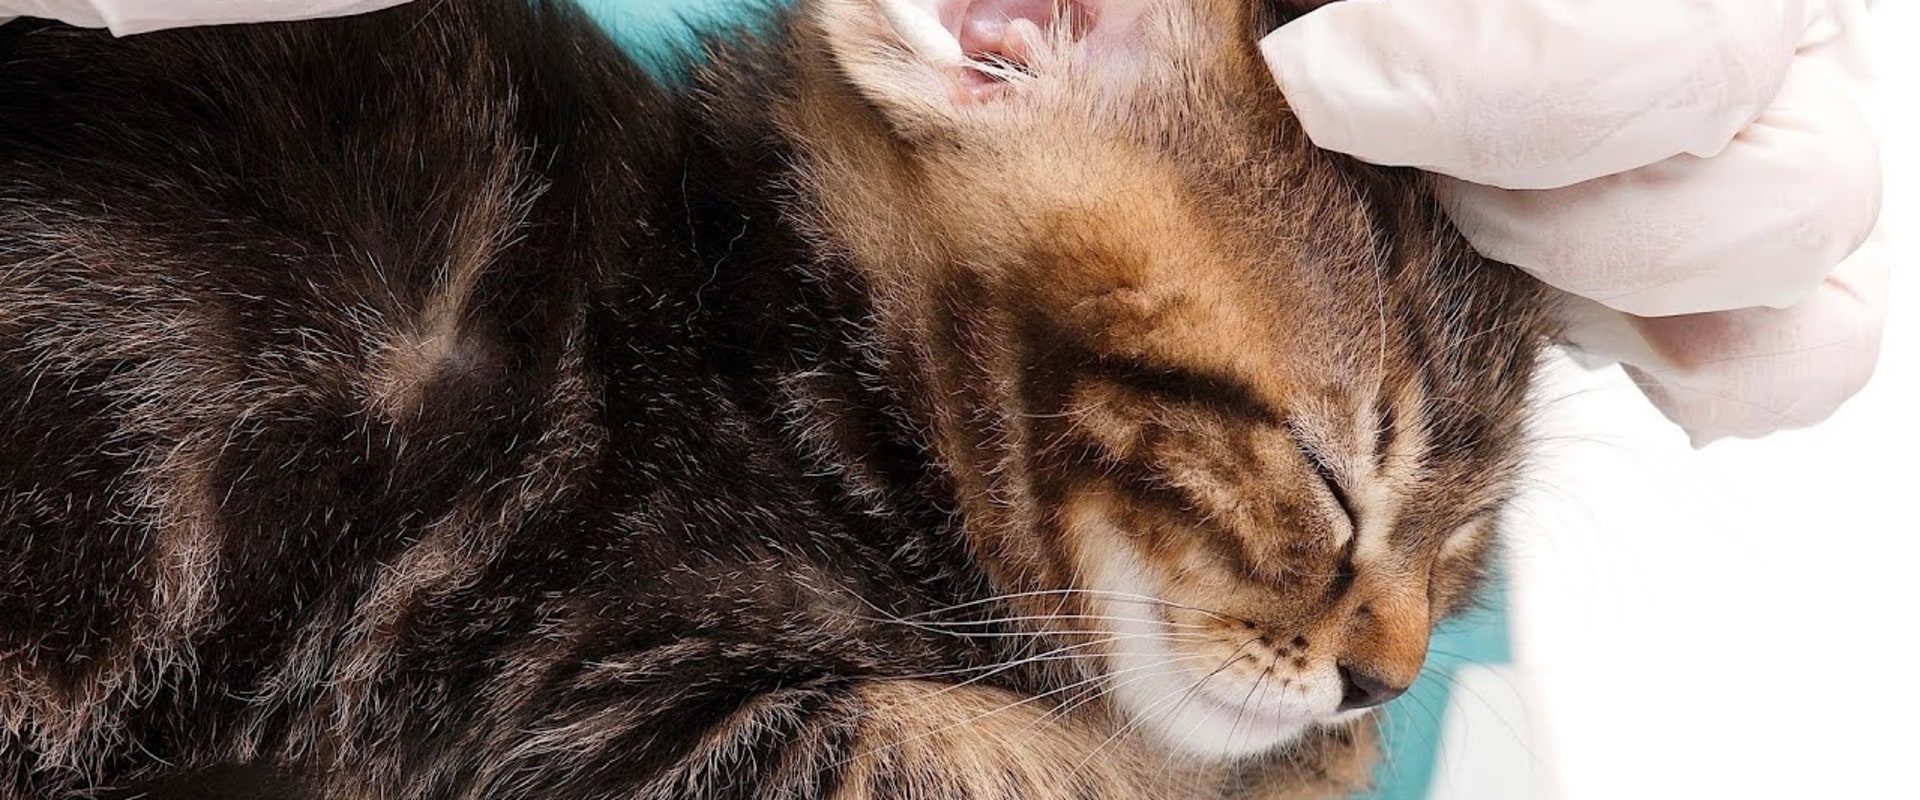 Caring for Your Cat: Cleaning Eyes and Ears